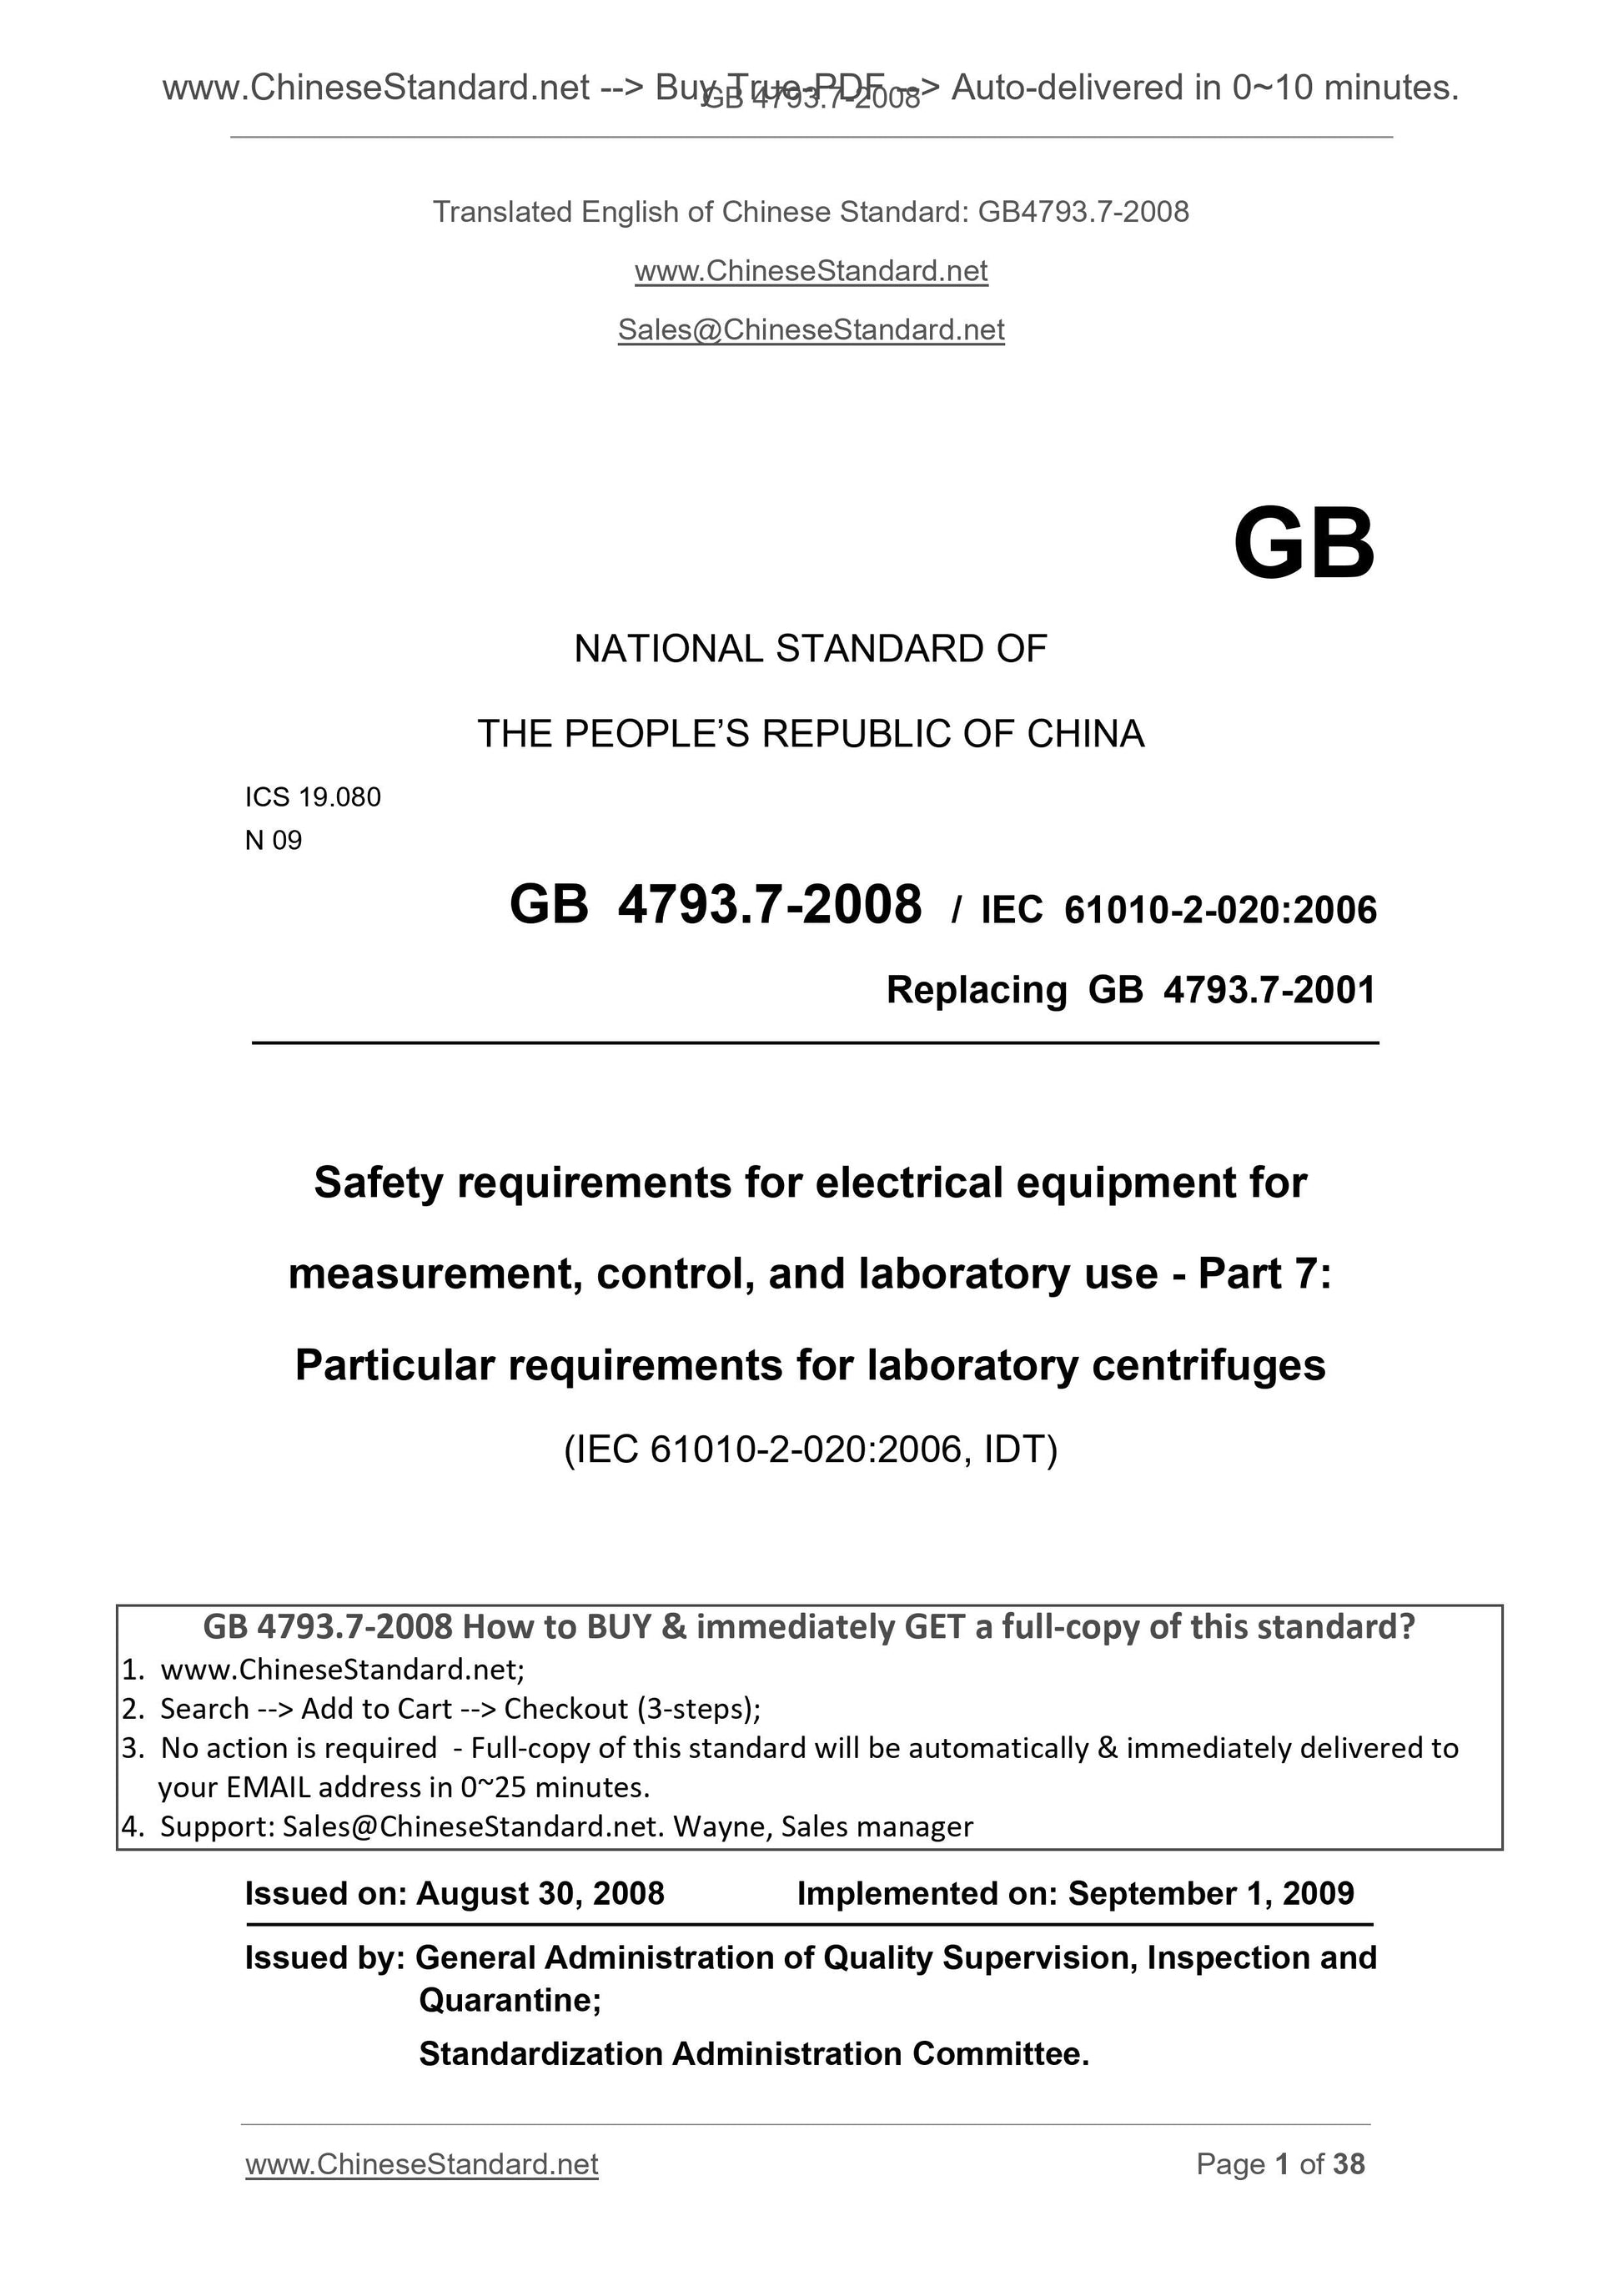 GB 4793.7-2008 Page 1